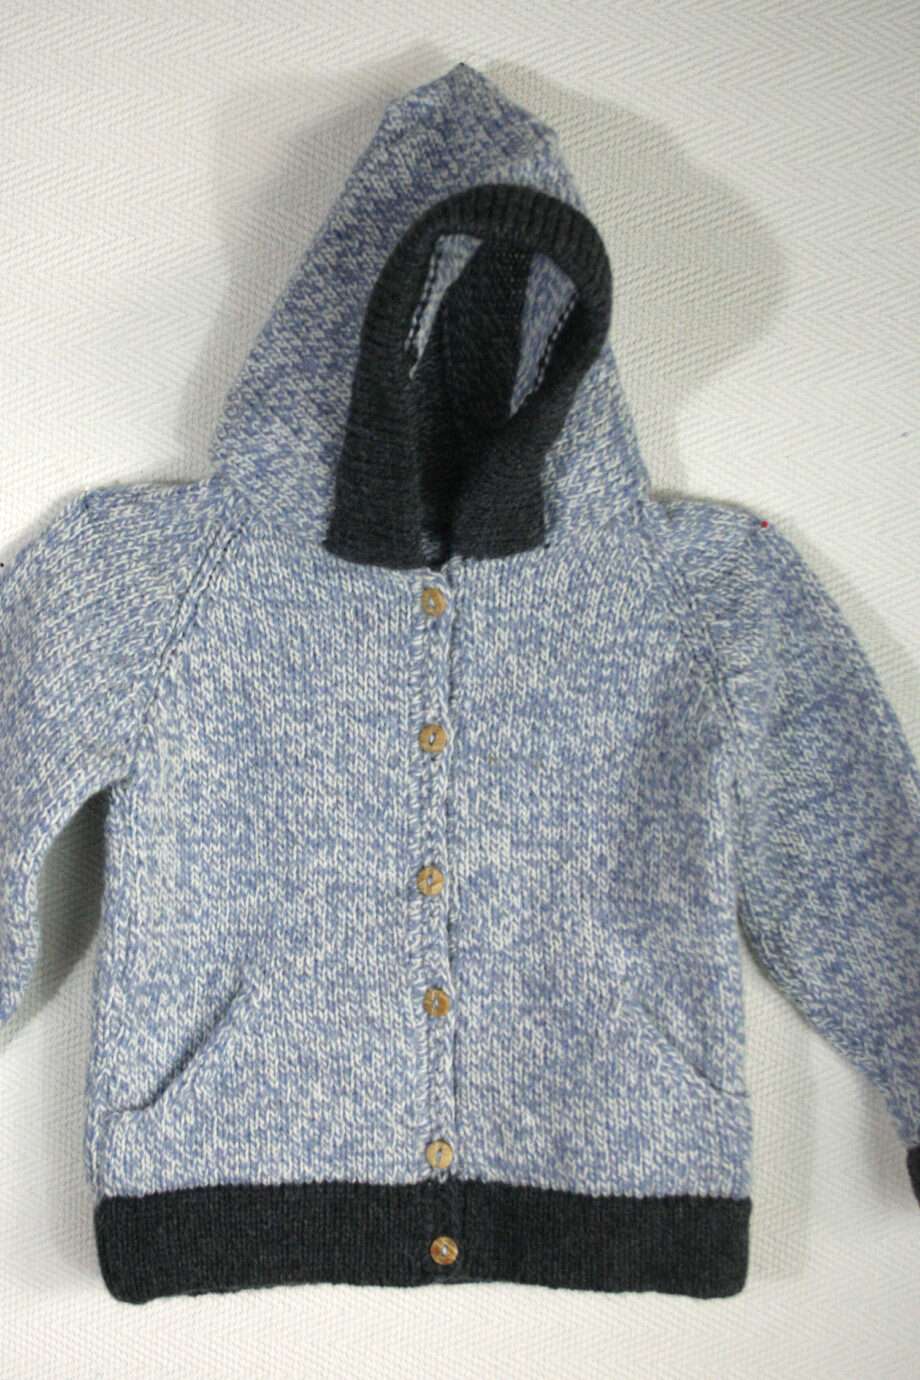 knitted woolen cardigan basic baby blue